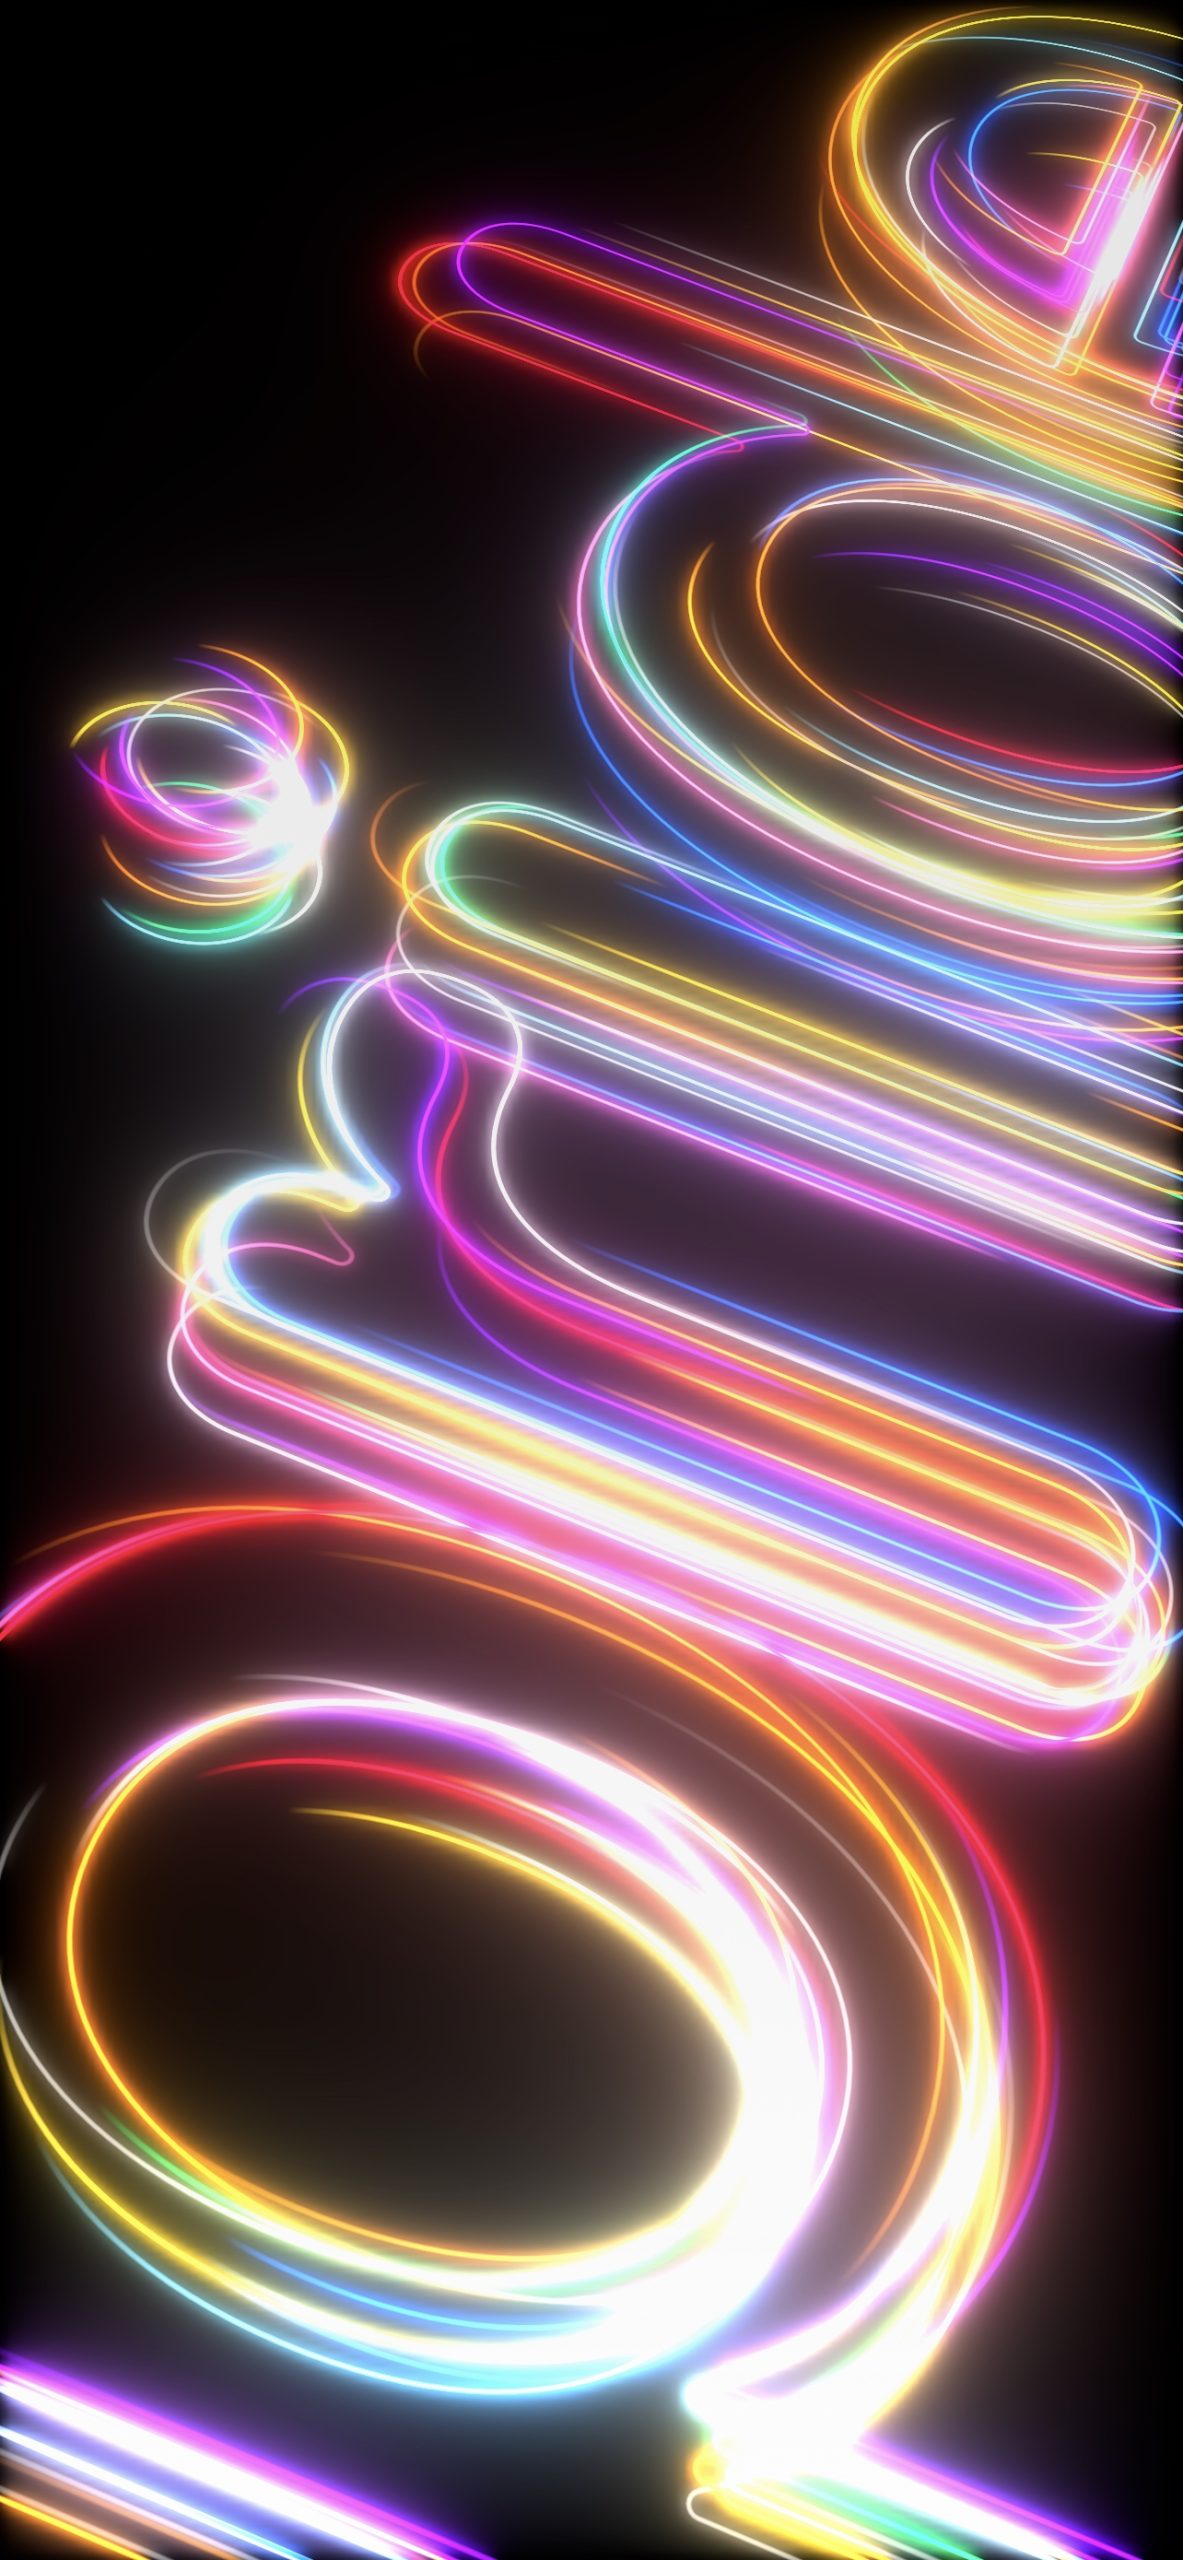 iOS 17.5 Pride neon lines wallpaper for iPhone